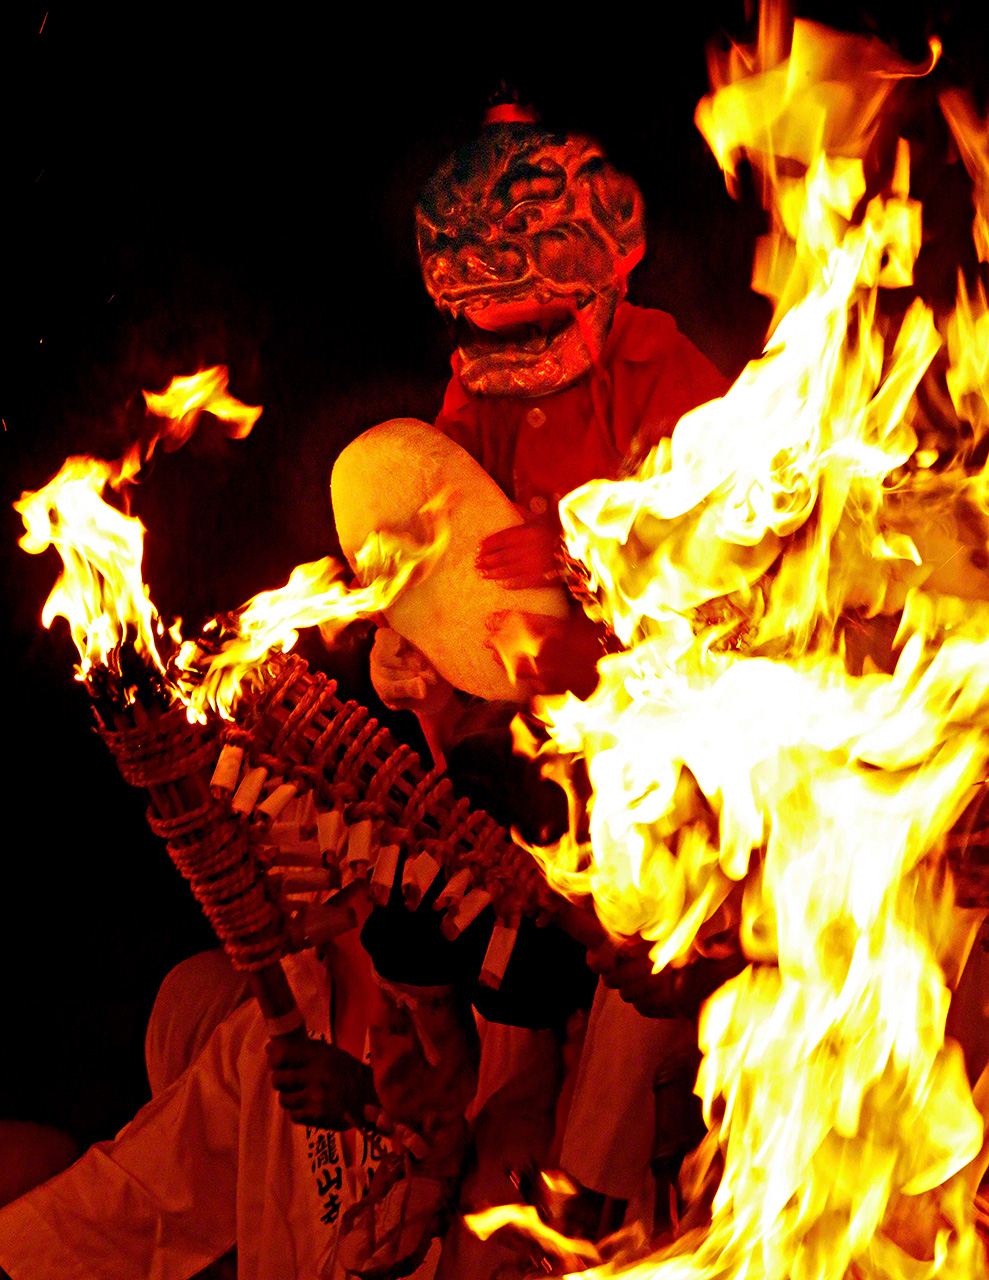 The Oni Festival at the Takisanji temple in Okazaki, Aichi Prefecture, is held in February around the seventh day of the first month on the lunar calendar. During the festival, a good harvest is promised when a demon holding a large kagami mochi (round rice cake) appears at the temple amid blazing torches. 